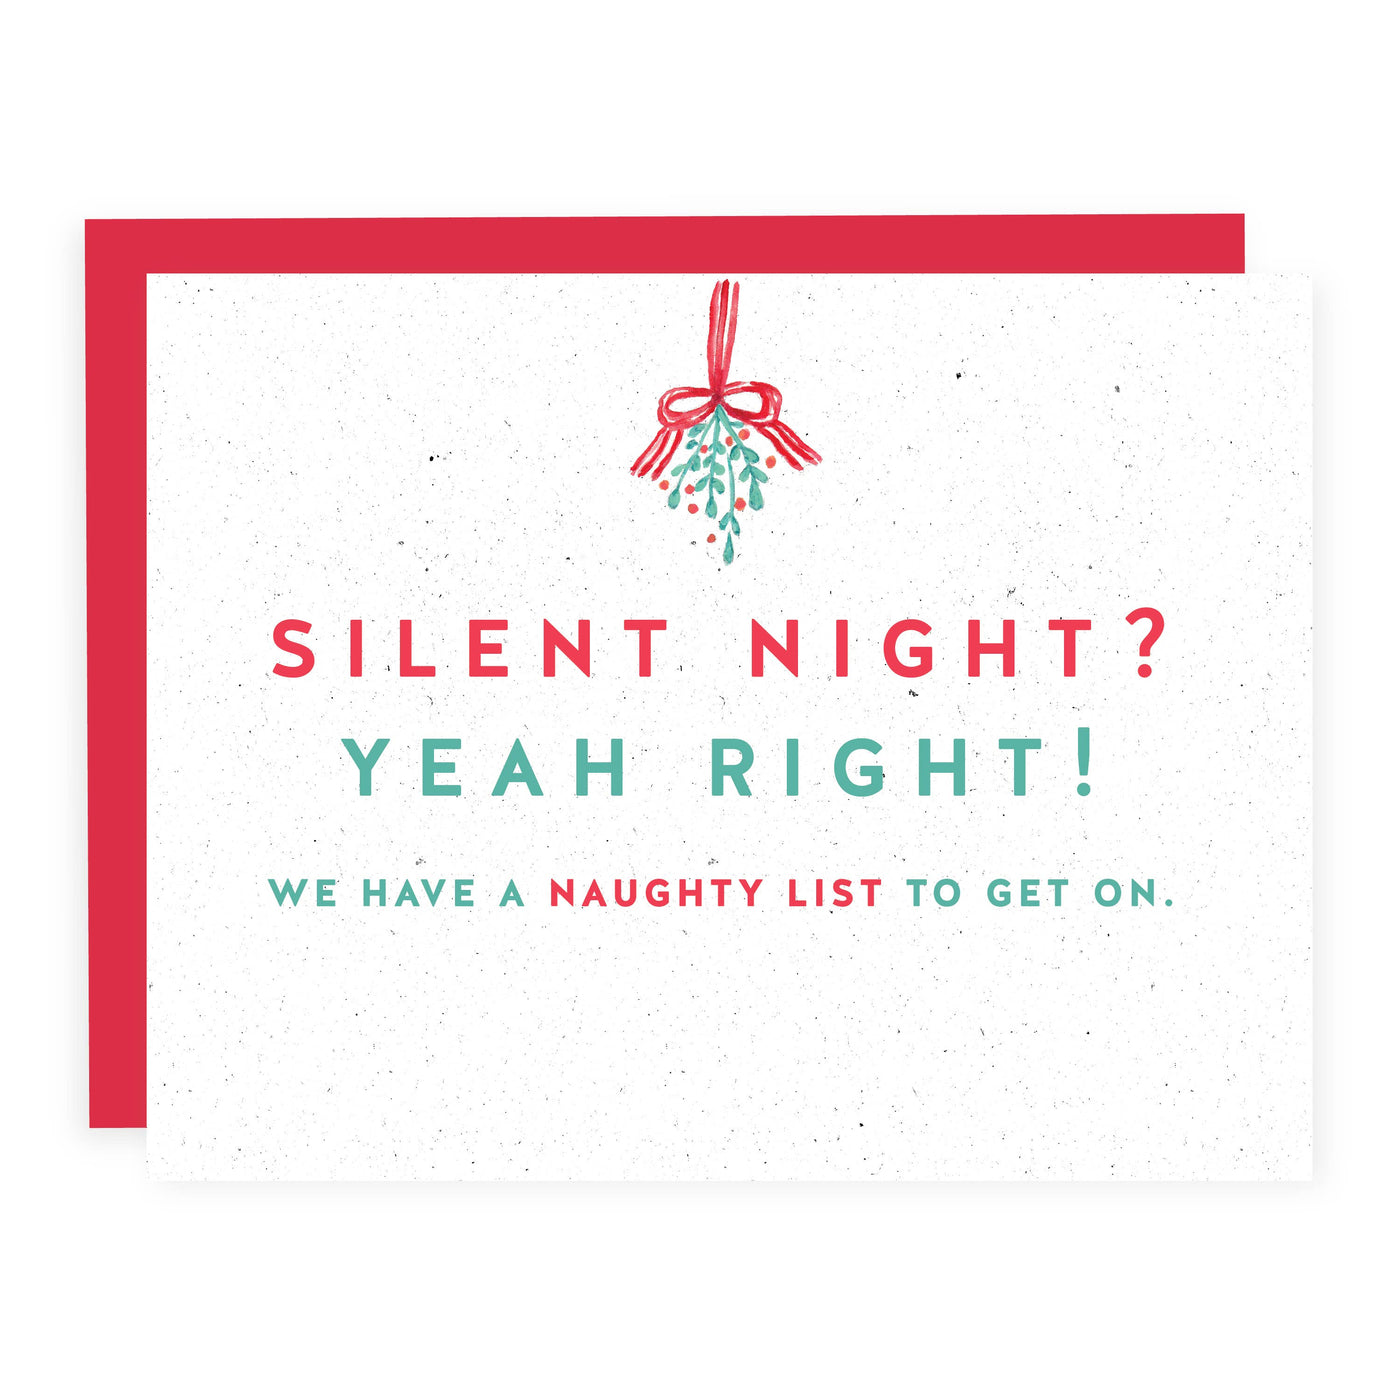 SIlent Night? Yeah RIght! | Christmas Card (SALE) - The Local Space